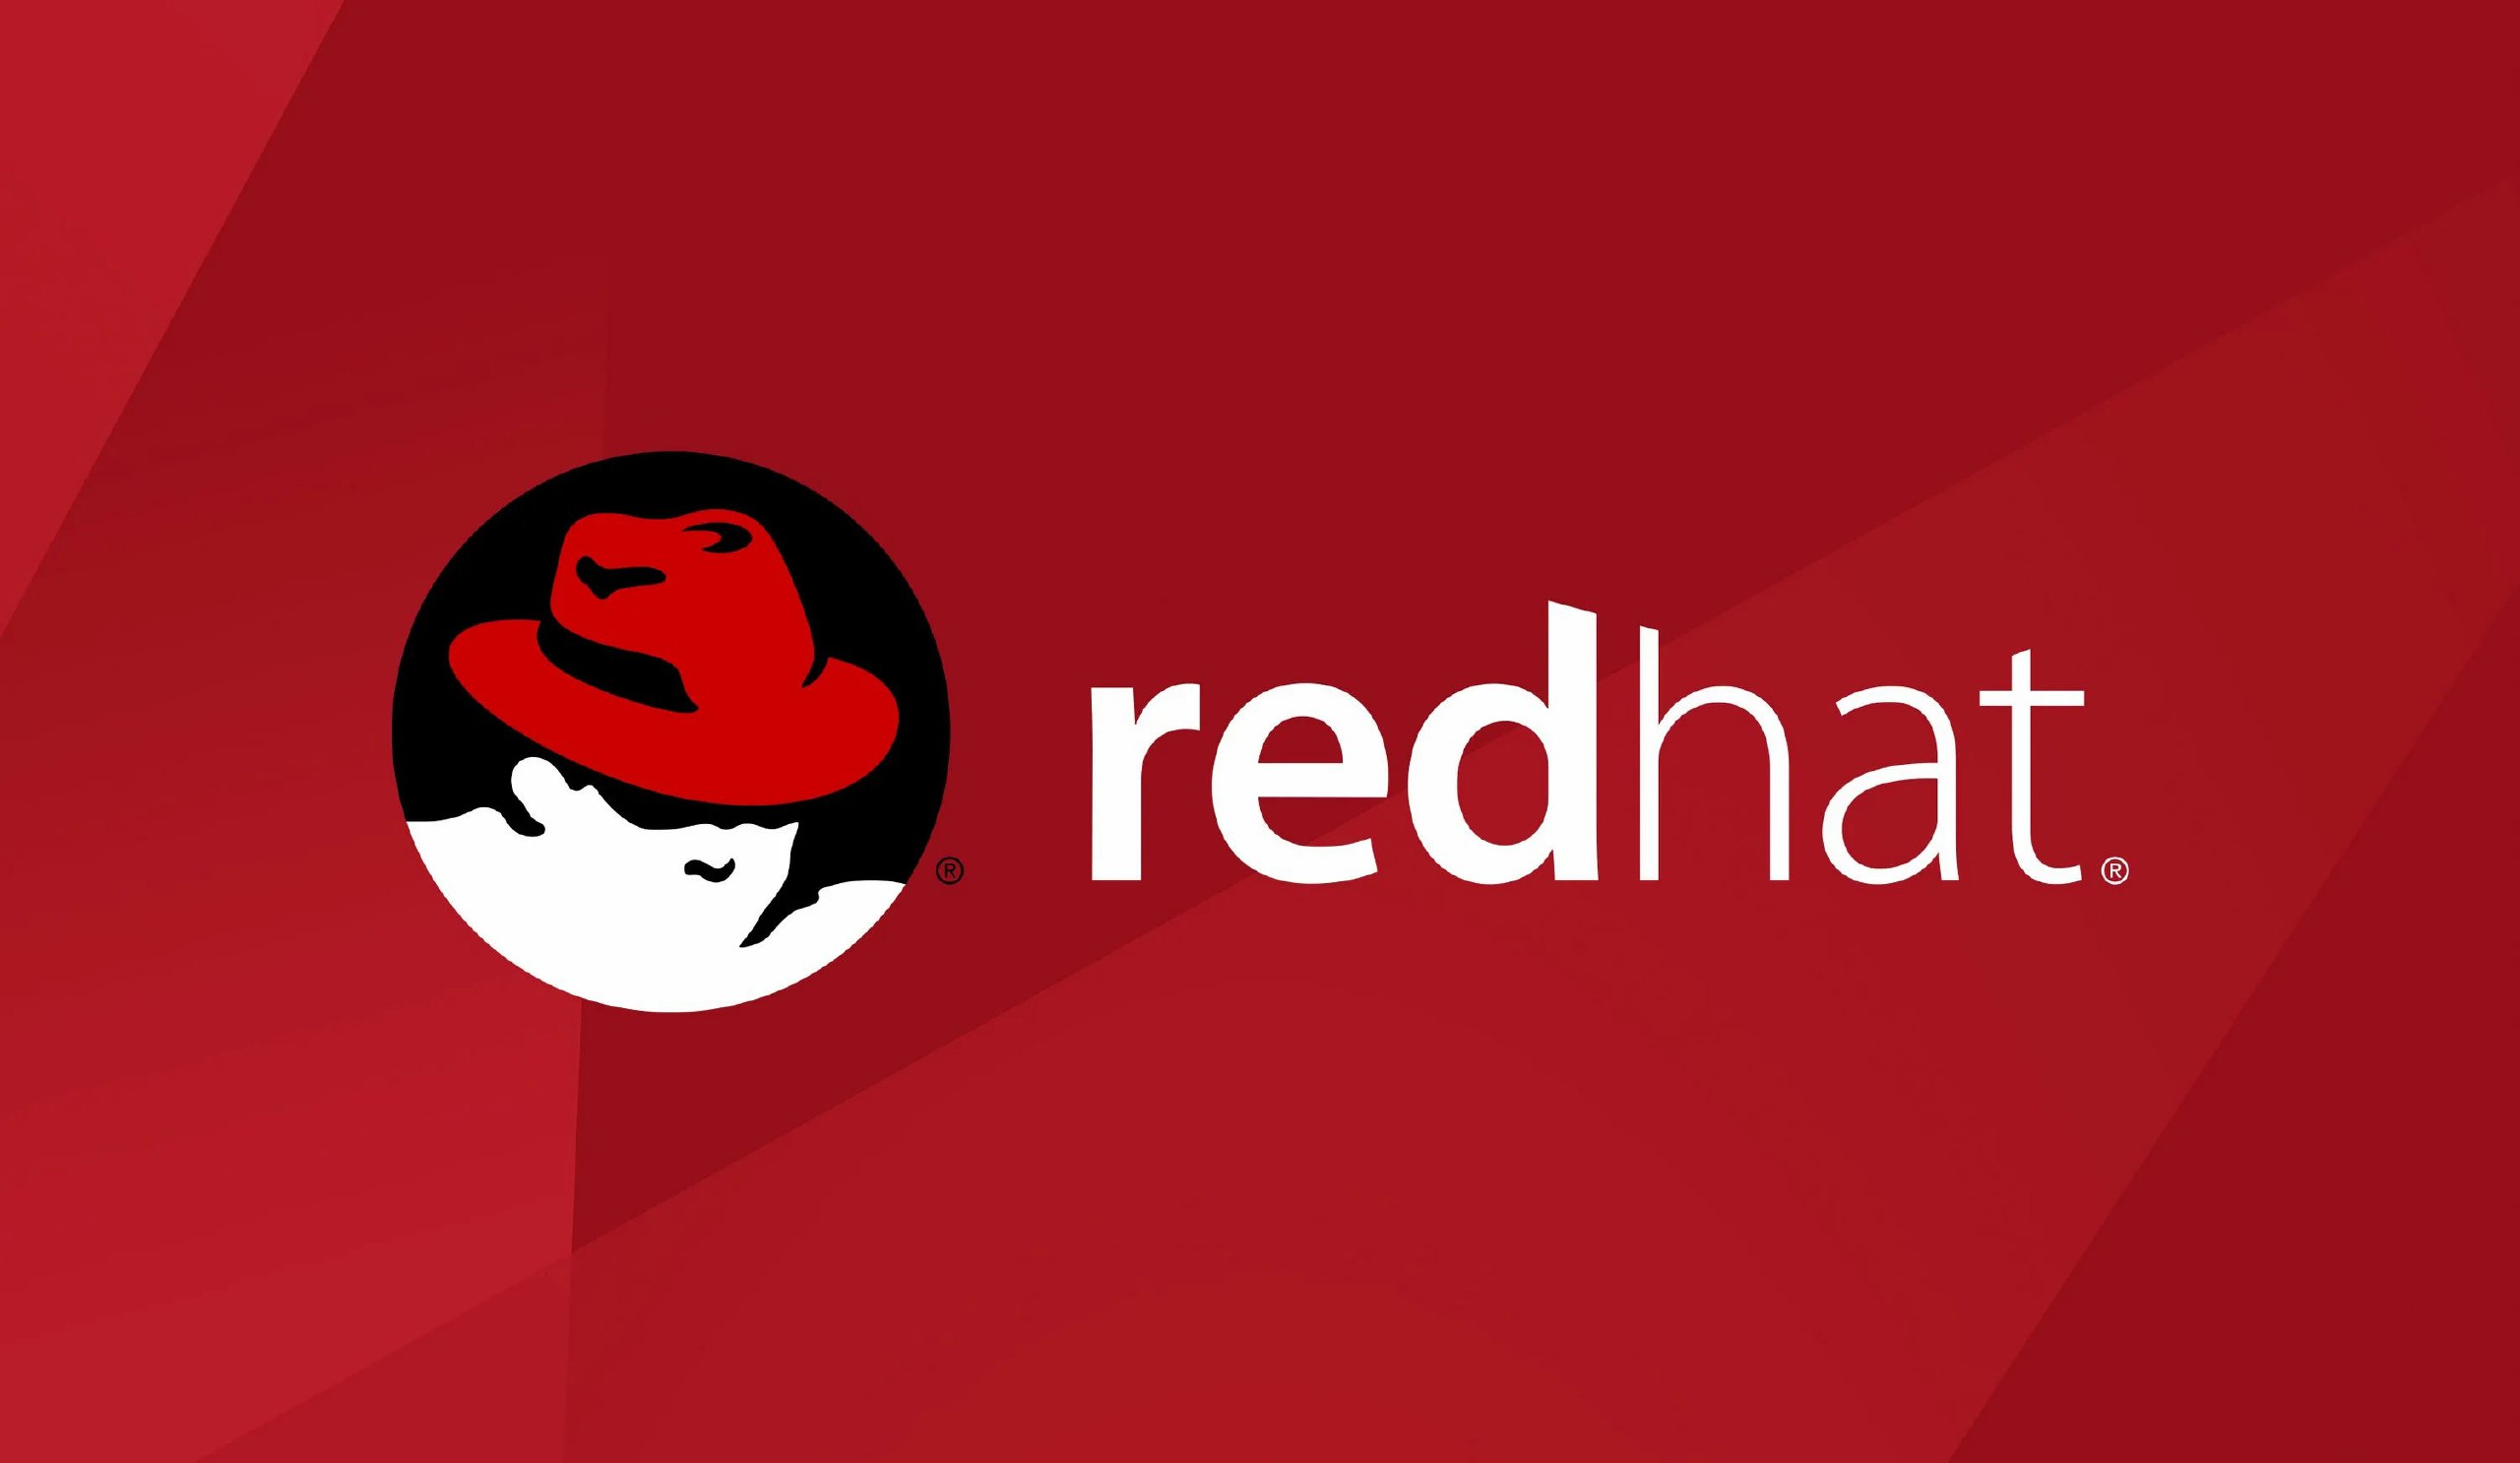 Red hat 2. Ред хат линукс. Red hat Enterprise Linux. Red hat логотип. Red hat Enterprise Linux 7.